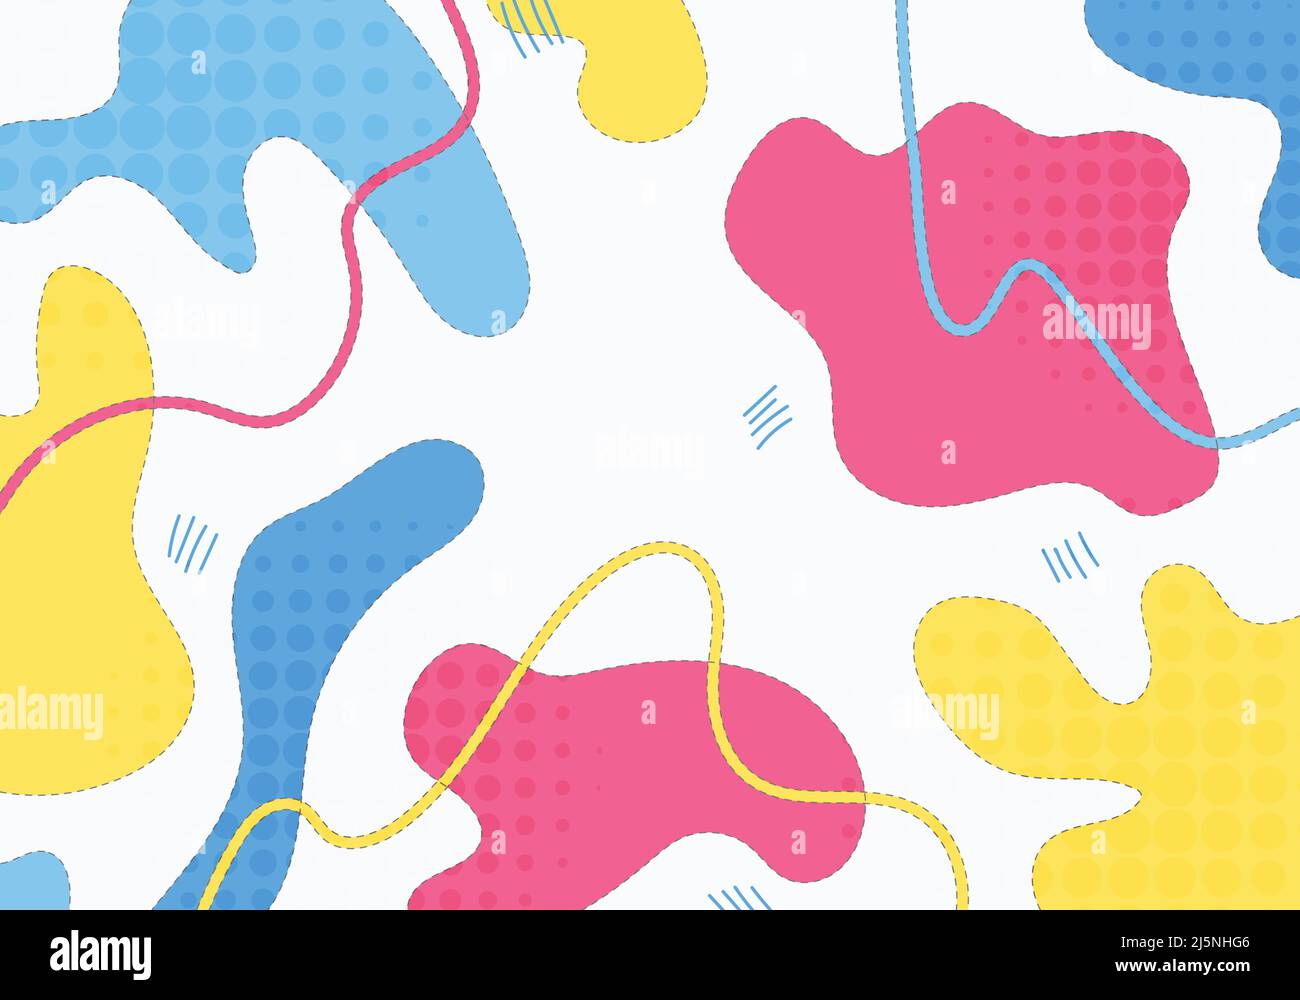 Abstract minimal doodle colorful style of shapes design template. Cover style of artwork background. Illustration vector Stock Vector